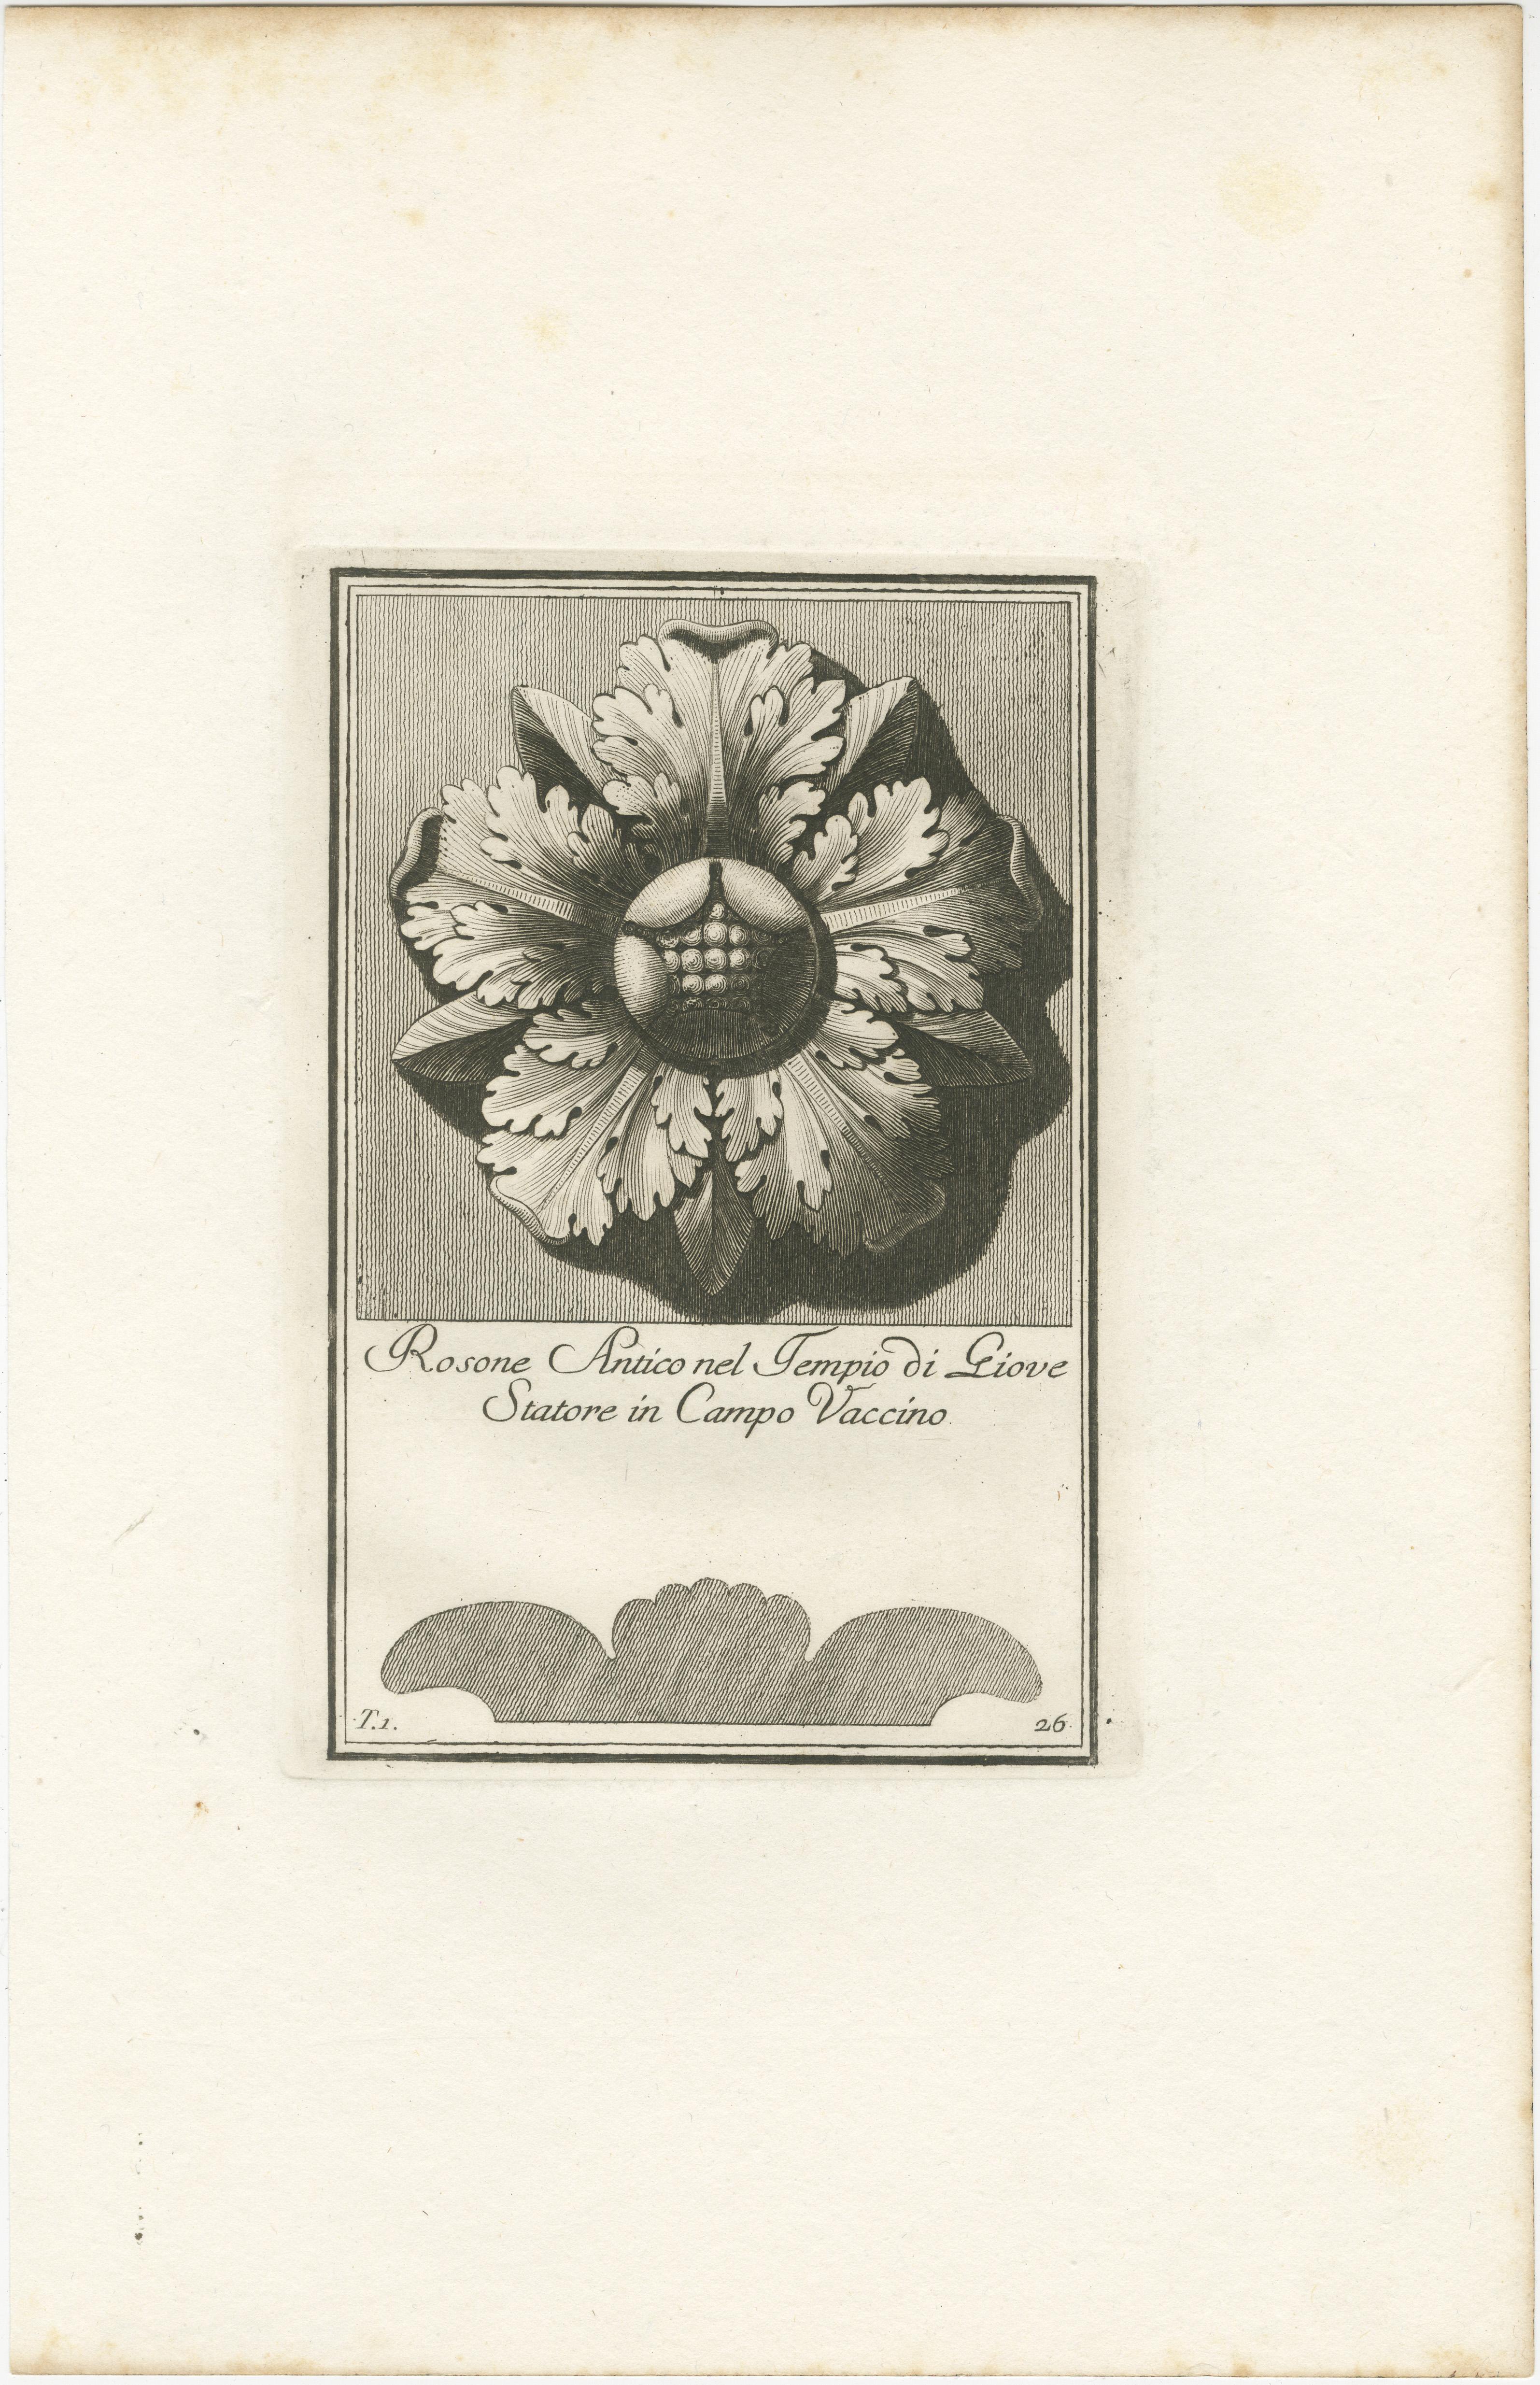 This elegant engraving from the late 18th century features a rosette, an ornamental design resembling a stylized rose, which has been a recurring motif in architectural design through the ages. Titled 